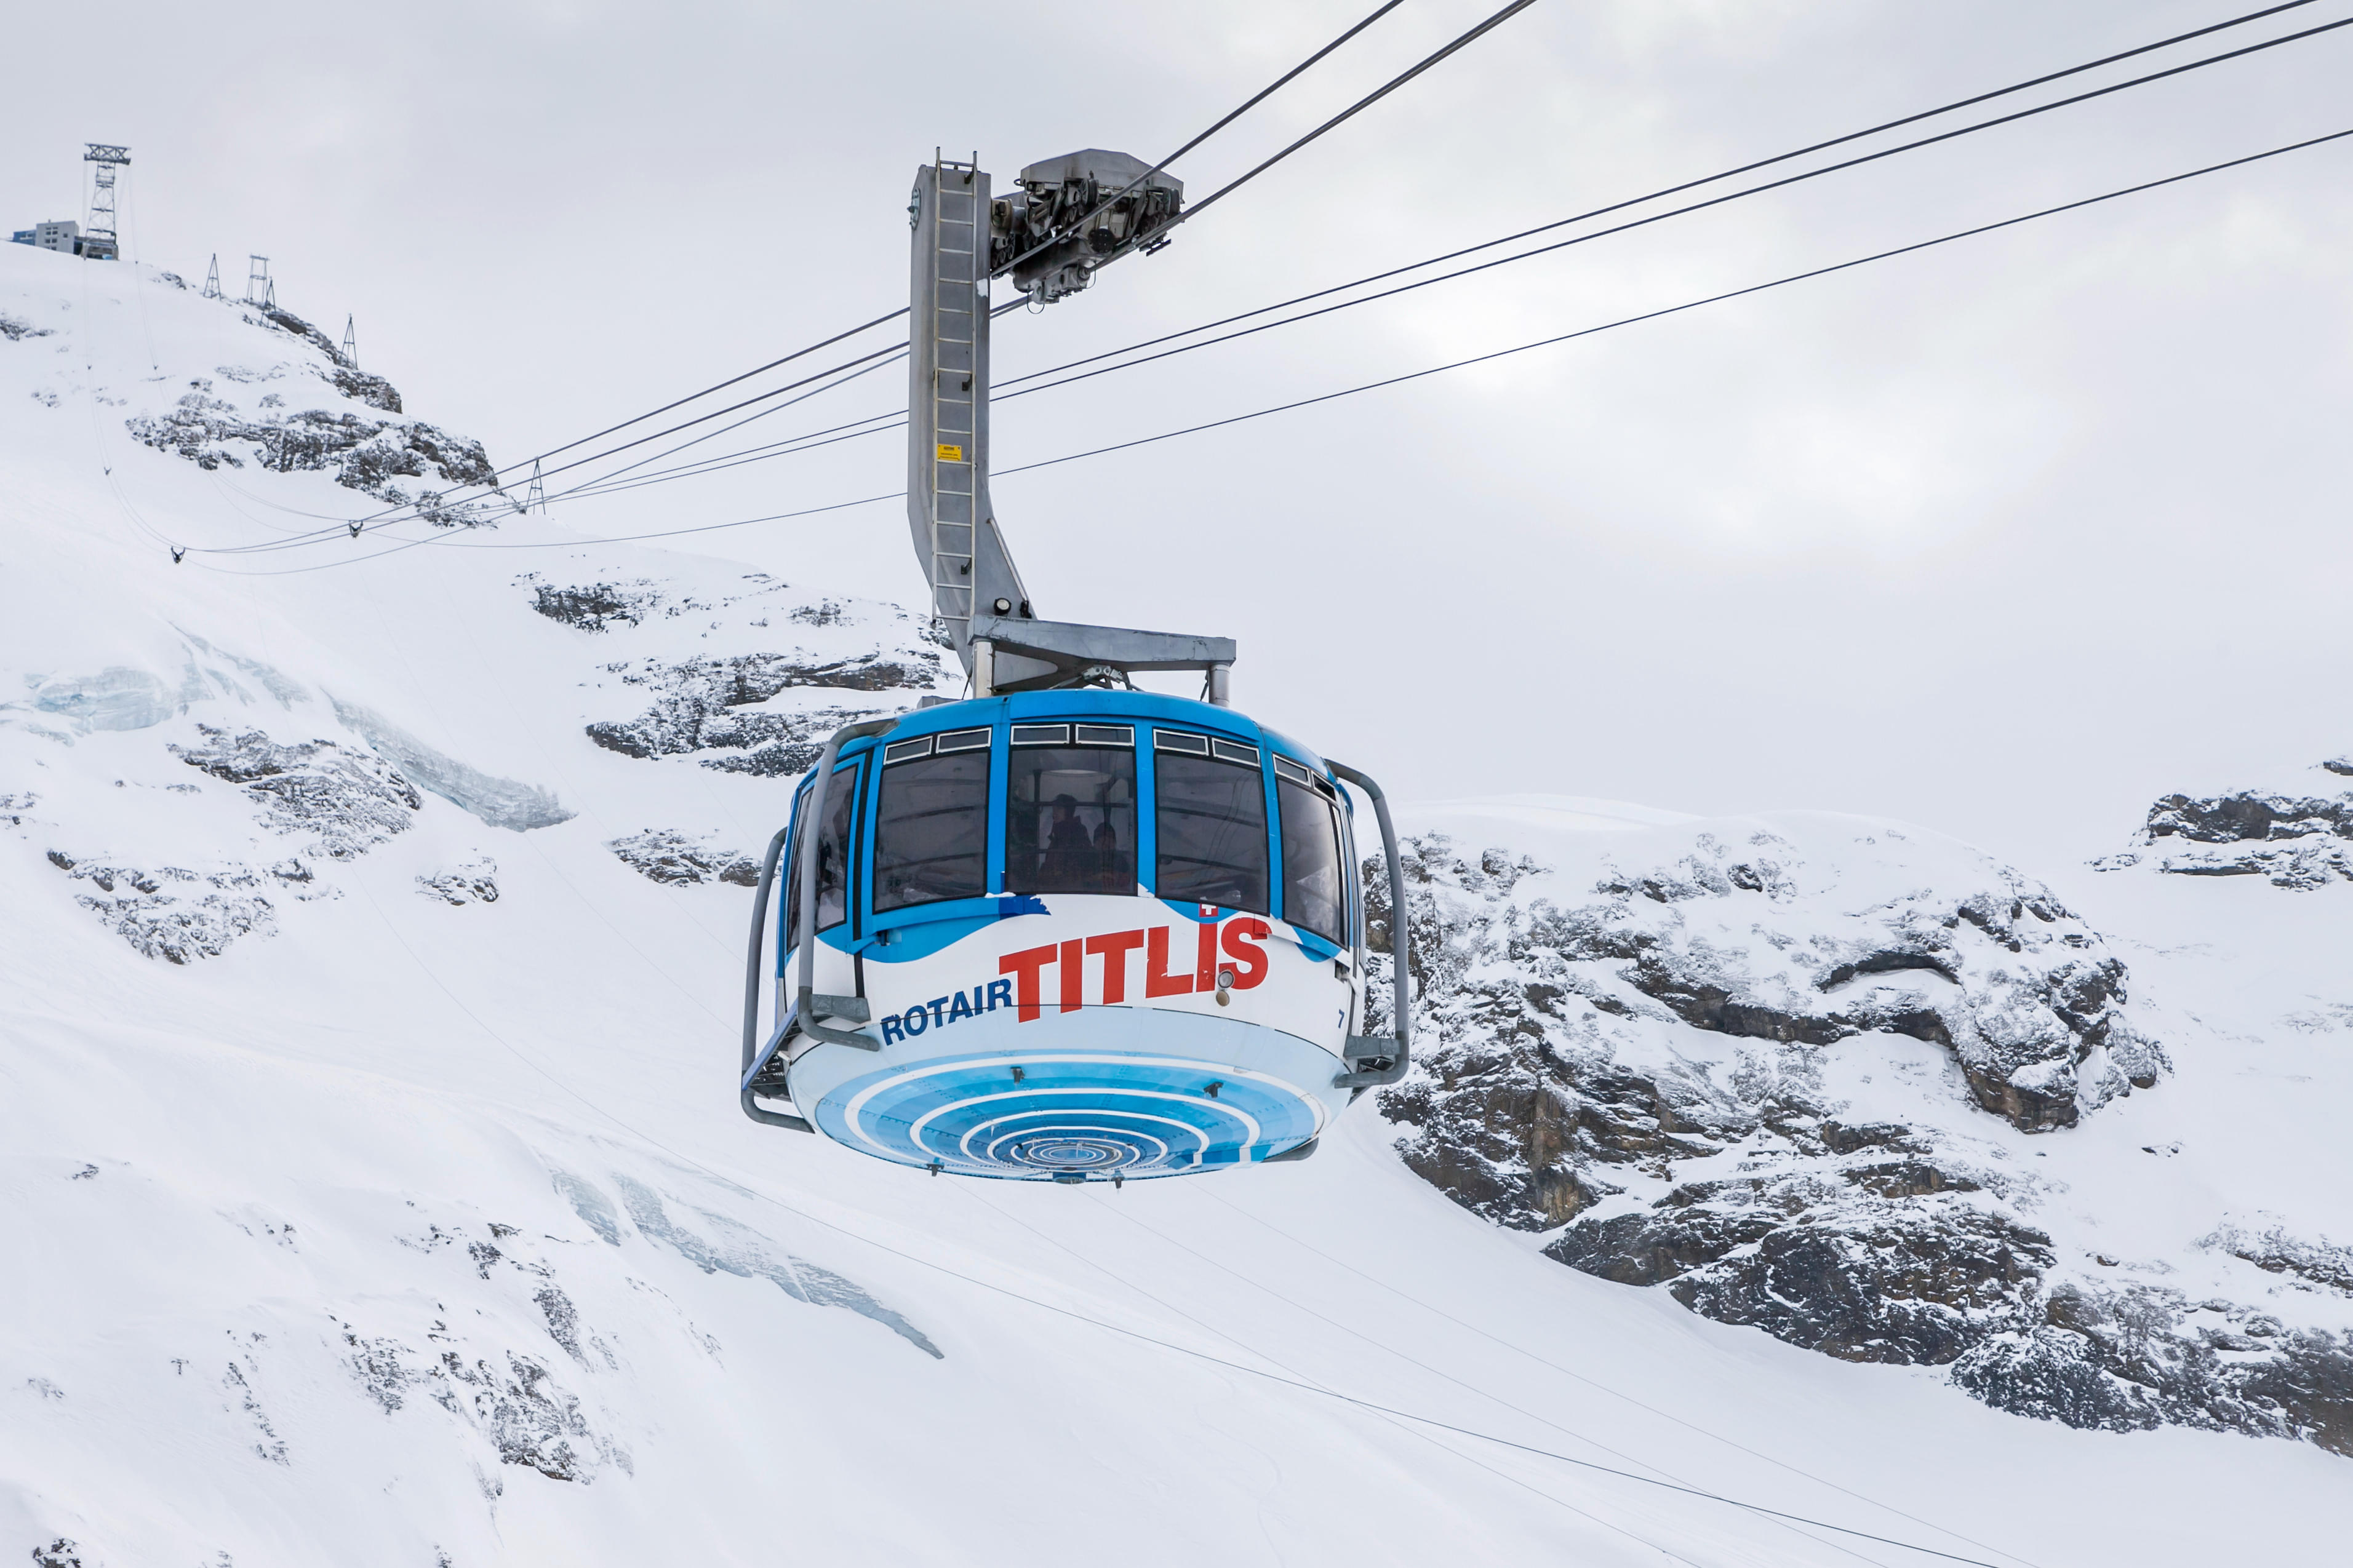 Explore Mount Titlis on a cable car ride